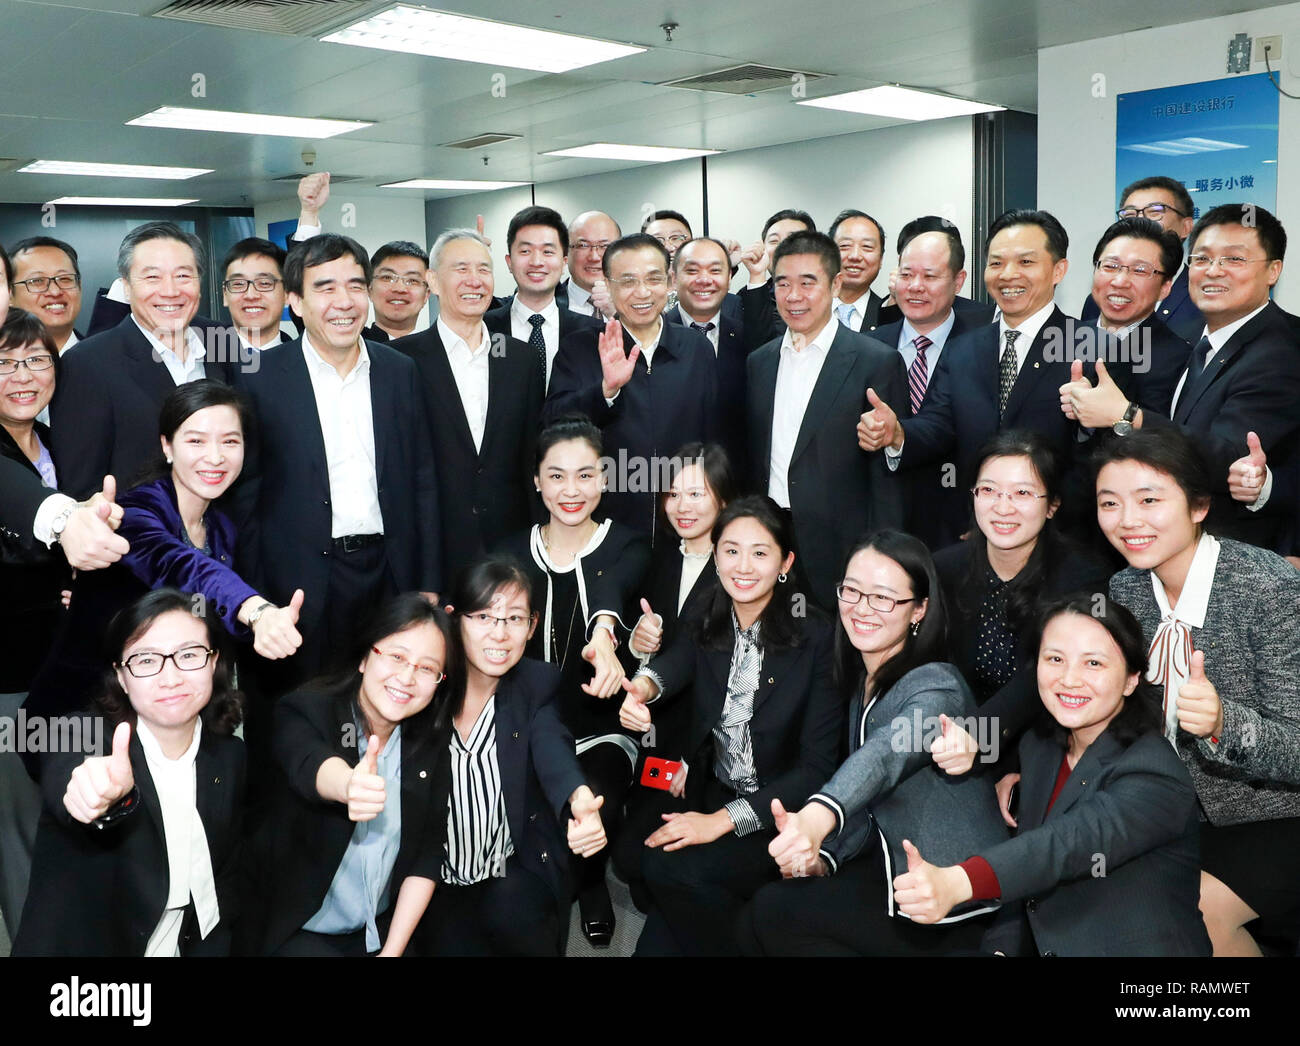 Beijing, China. 4th Jan, 2019. Chinese Premier Li Keqiang poses for a group photo with staff members during his visit to China Construction Bank in Beijing, capital of China, Jan. 4, 2019. Li Keqiang paid a visit to Bank of China, Industrial and Commercial Bank of China, and China Construction Bank on Friday. Li also held a meeting at the China Banking and Insurance Regulatory Commission after the visit. Credit: Pang Xinglei/Xinhua/Alamy Live News Stock Photo